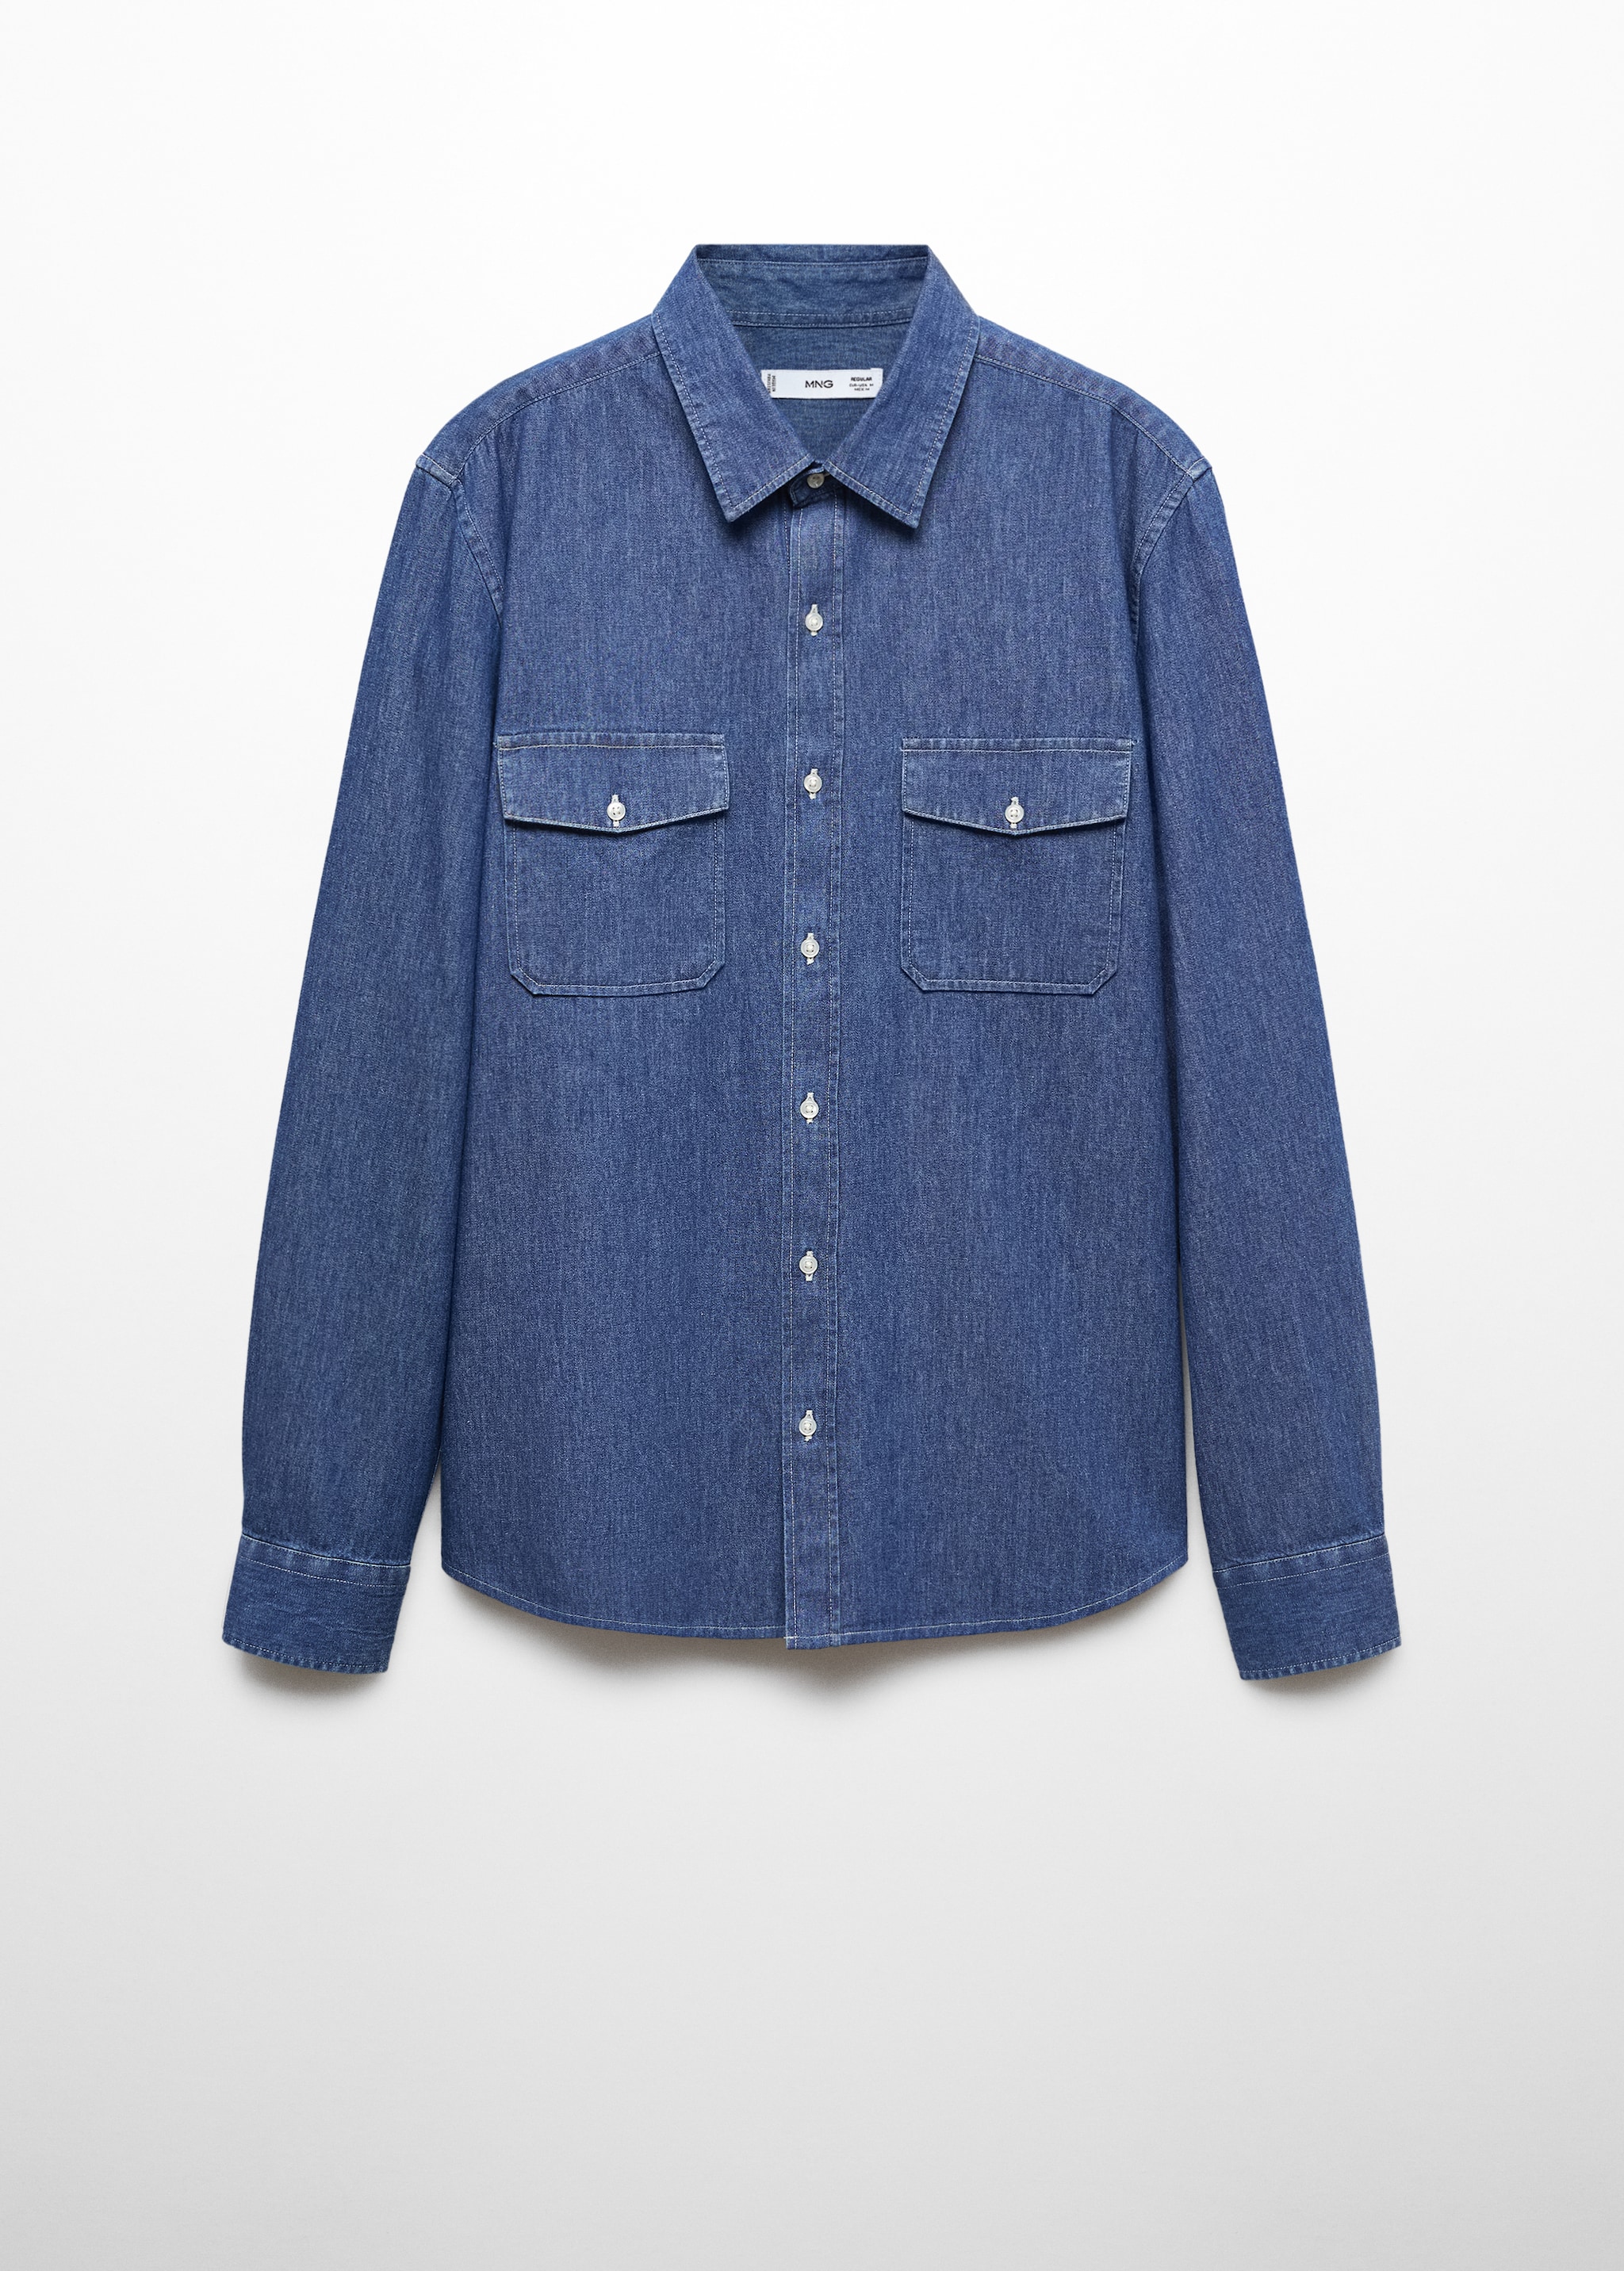 Denim overshirt with pockets - Article without model